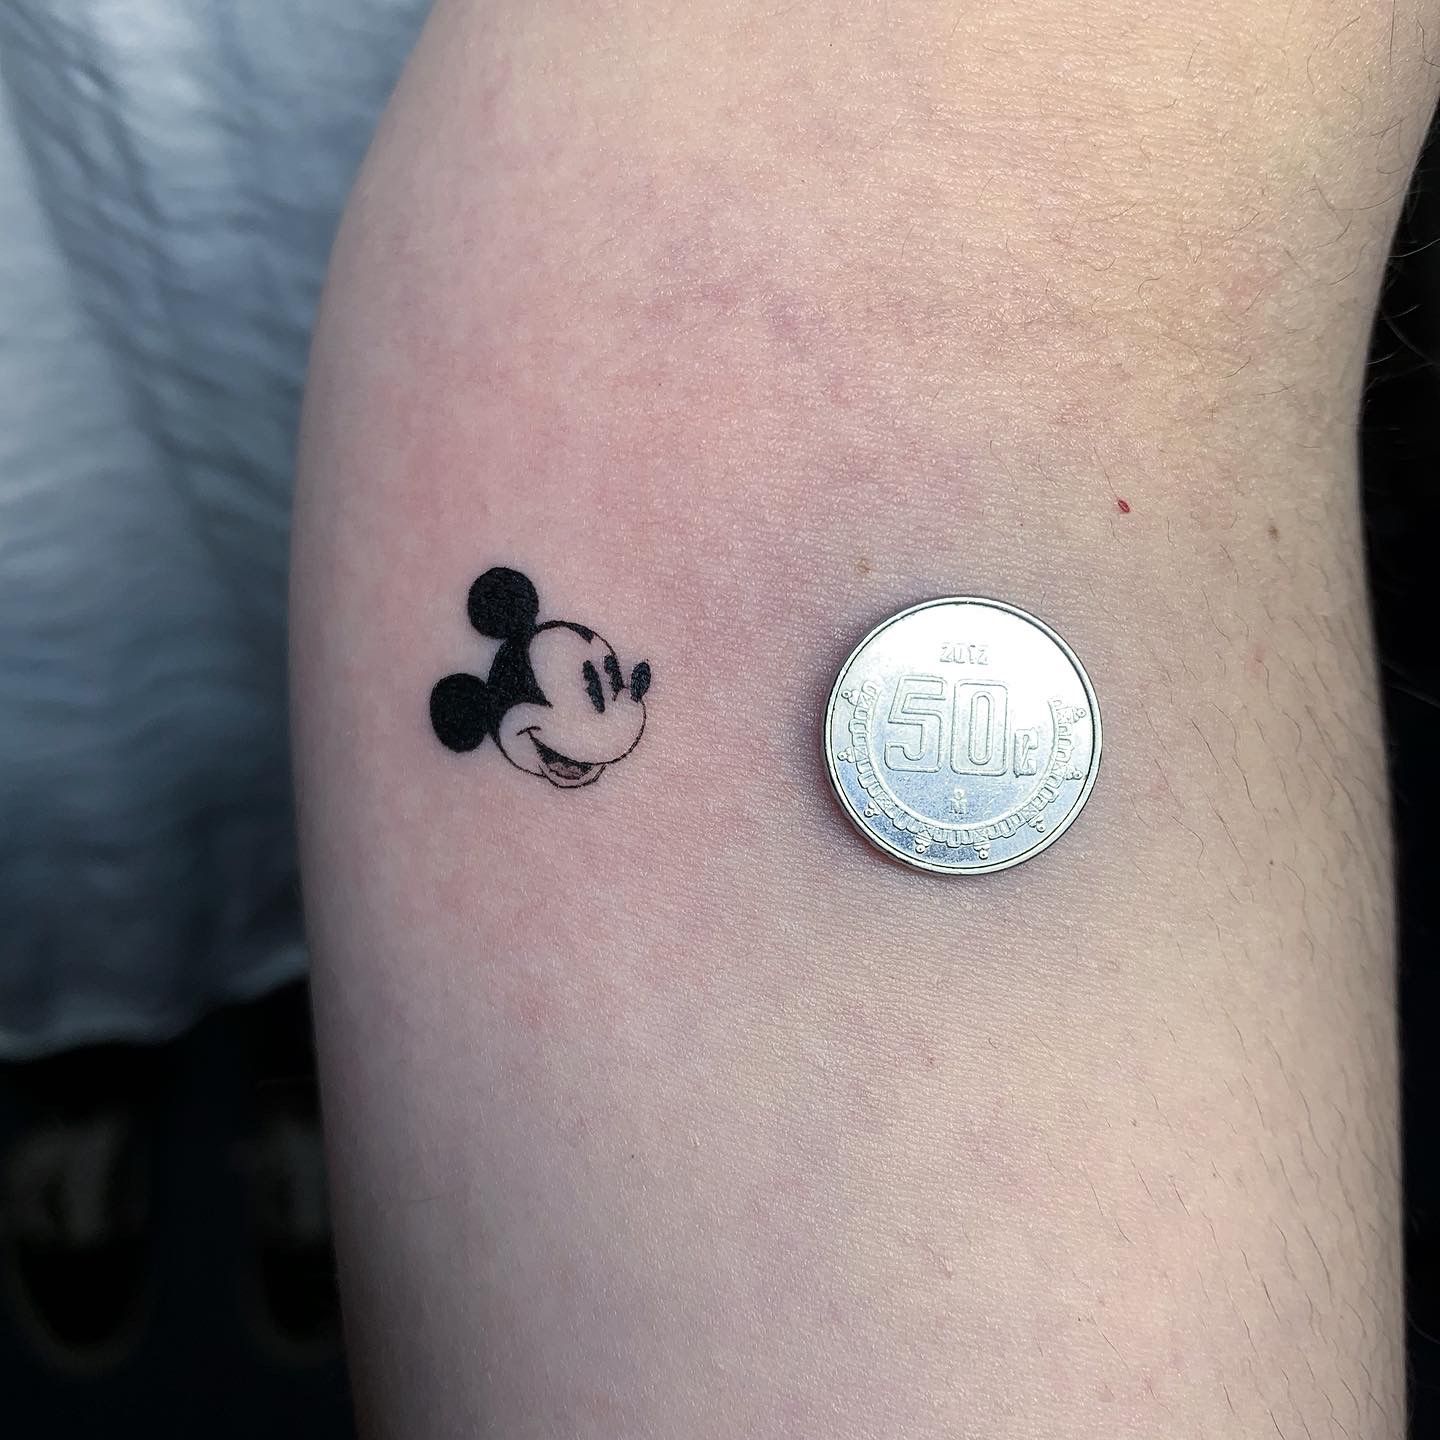 Gold Mickey Mouse tattoo located on the inner forearm.